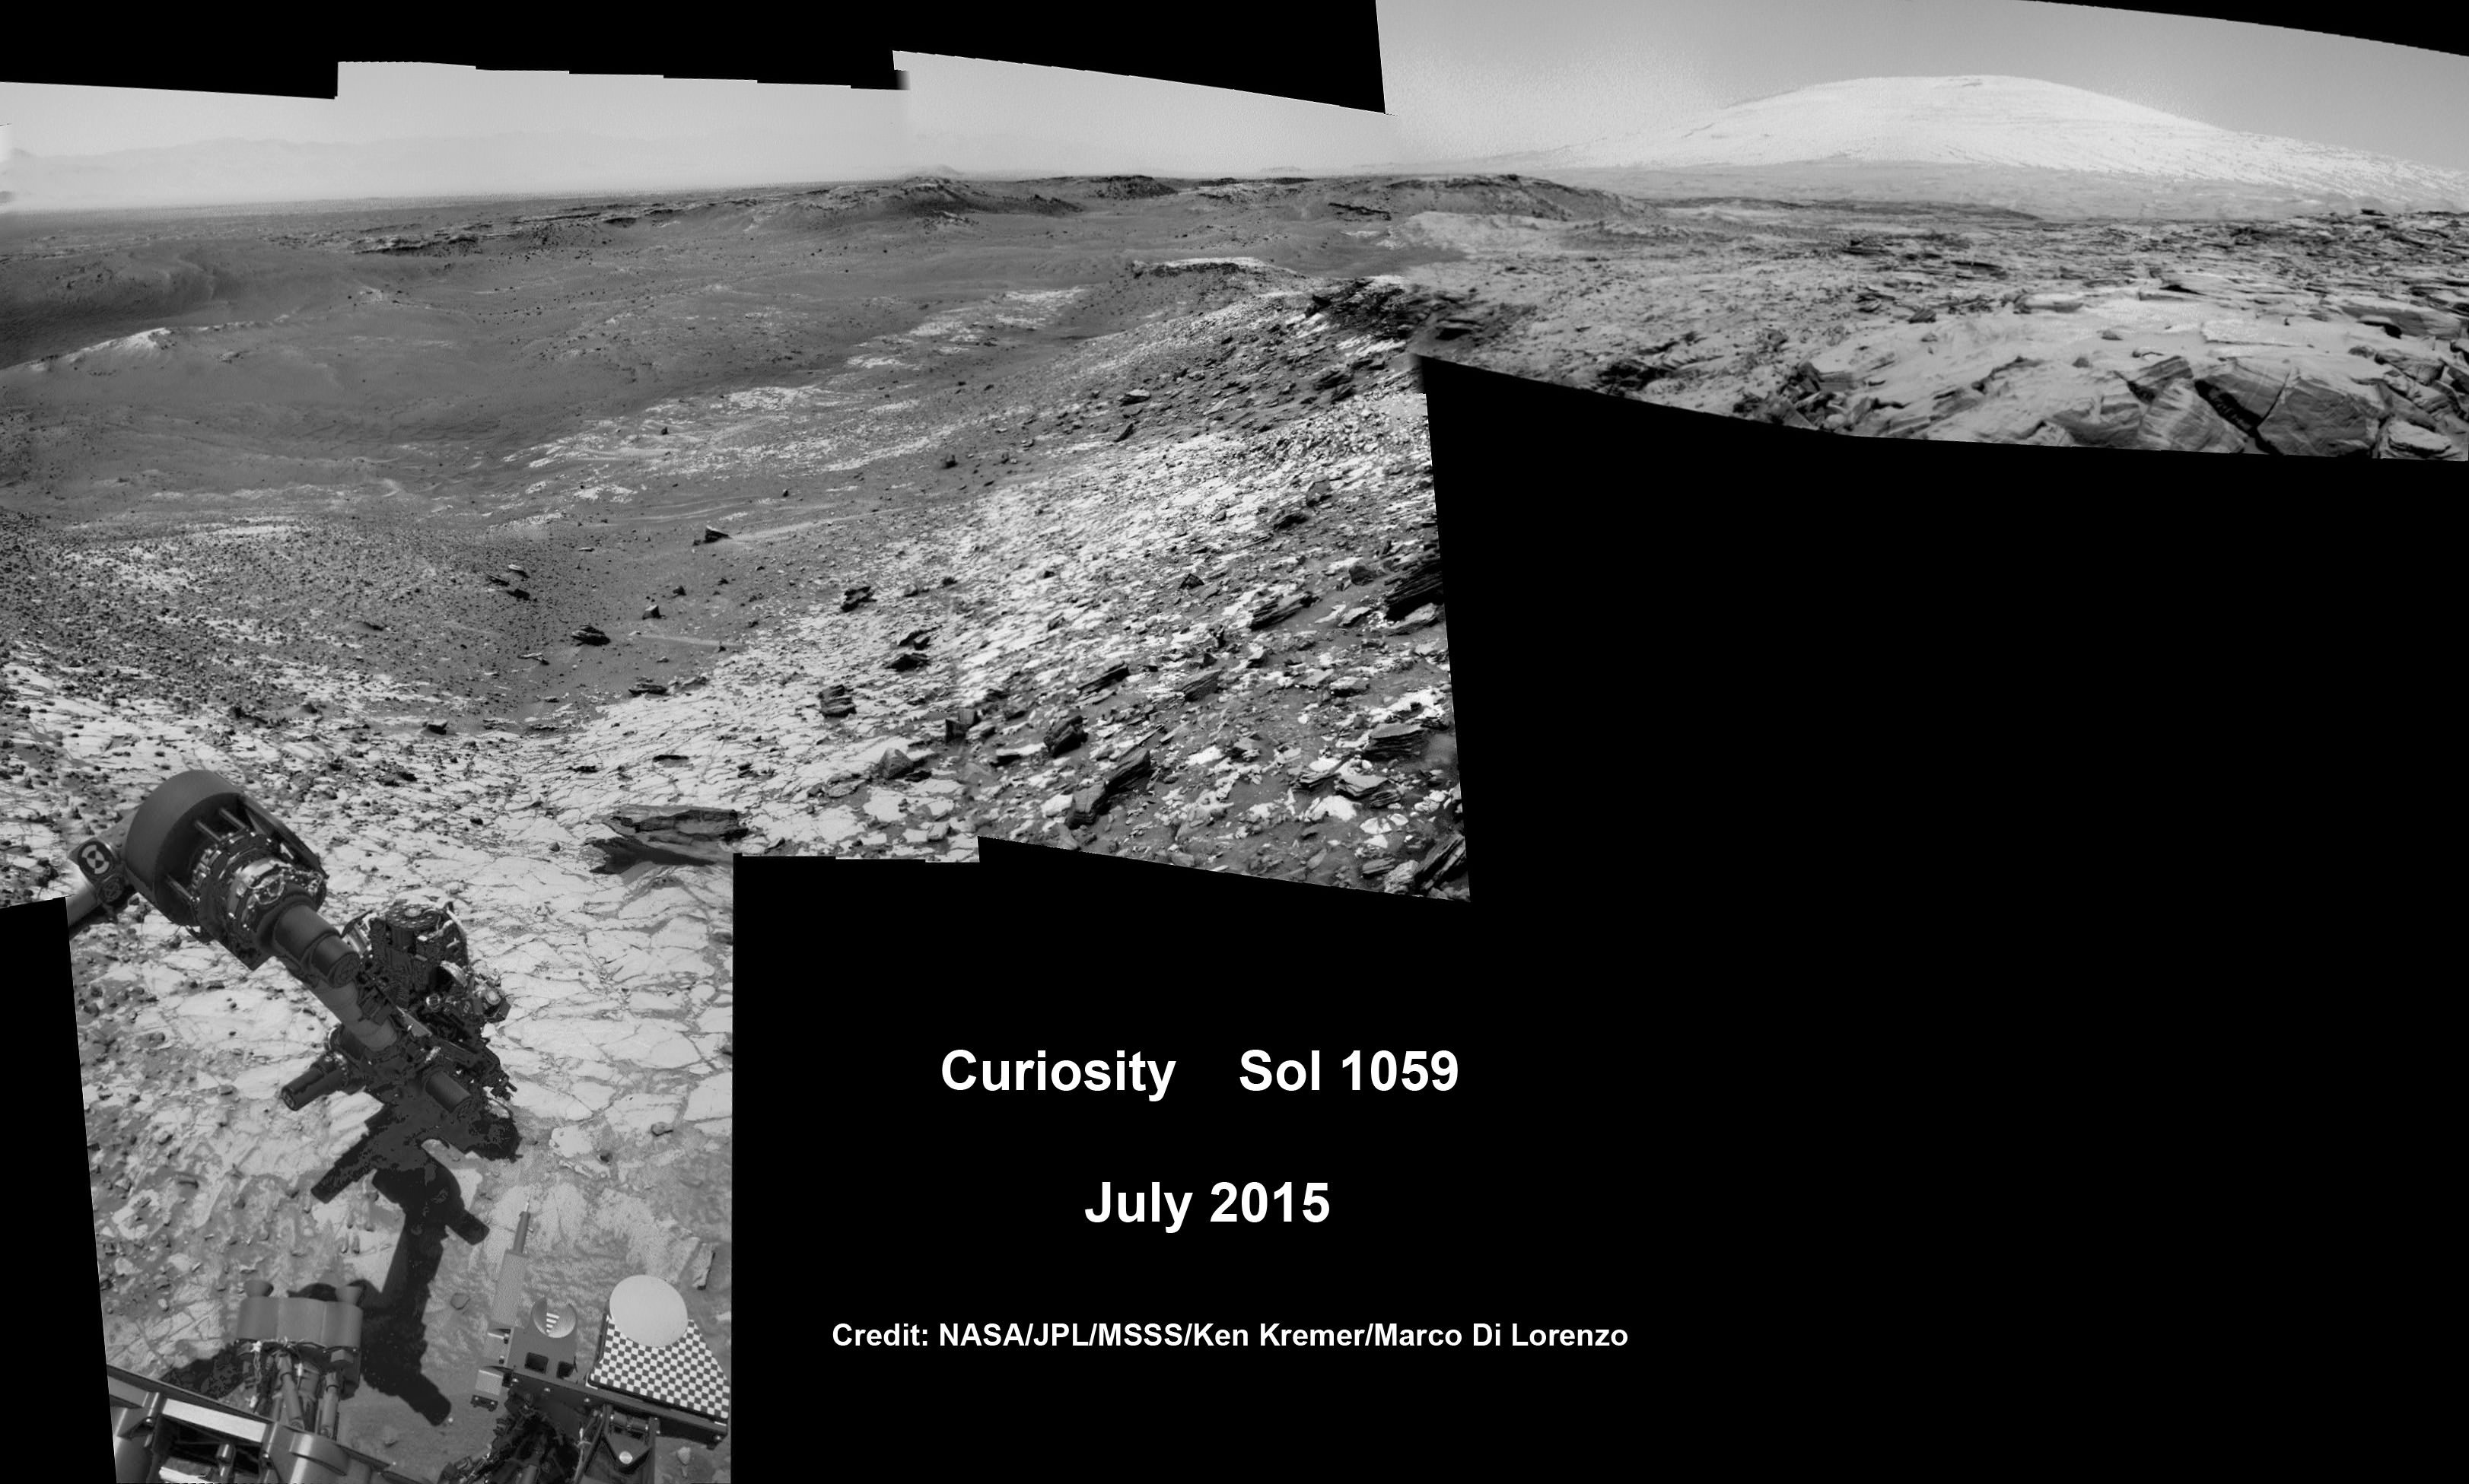 Curiosity conducts test drill at “Buckskin” rock target at bright toned “Lion” outcrop on the lower region of Mount Sharp on Mars, seen at right.   Gale crater rim seen in the distant background at left, in this composite mosaic of navcam raw images taken to Sol 1059, July 30, 2015.  Navcam camera raw images stitched. Credit:  NASA/JPL-Caltech/Ken Kremer/kenkremer.com/Marco Di Lorenzo  